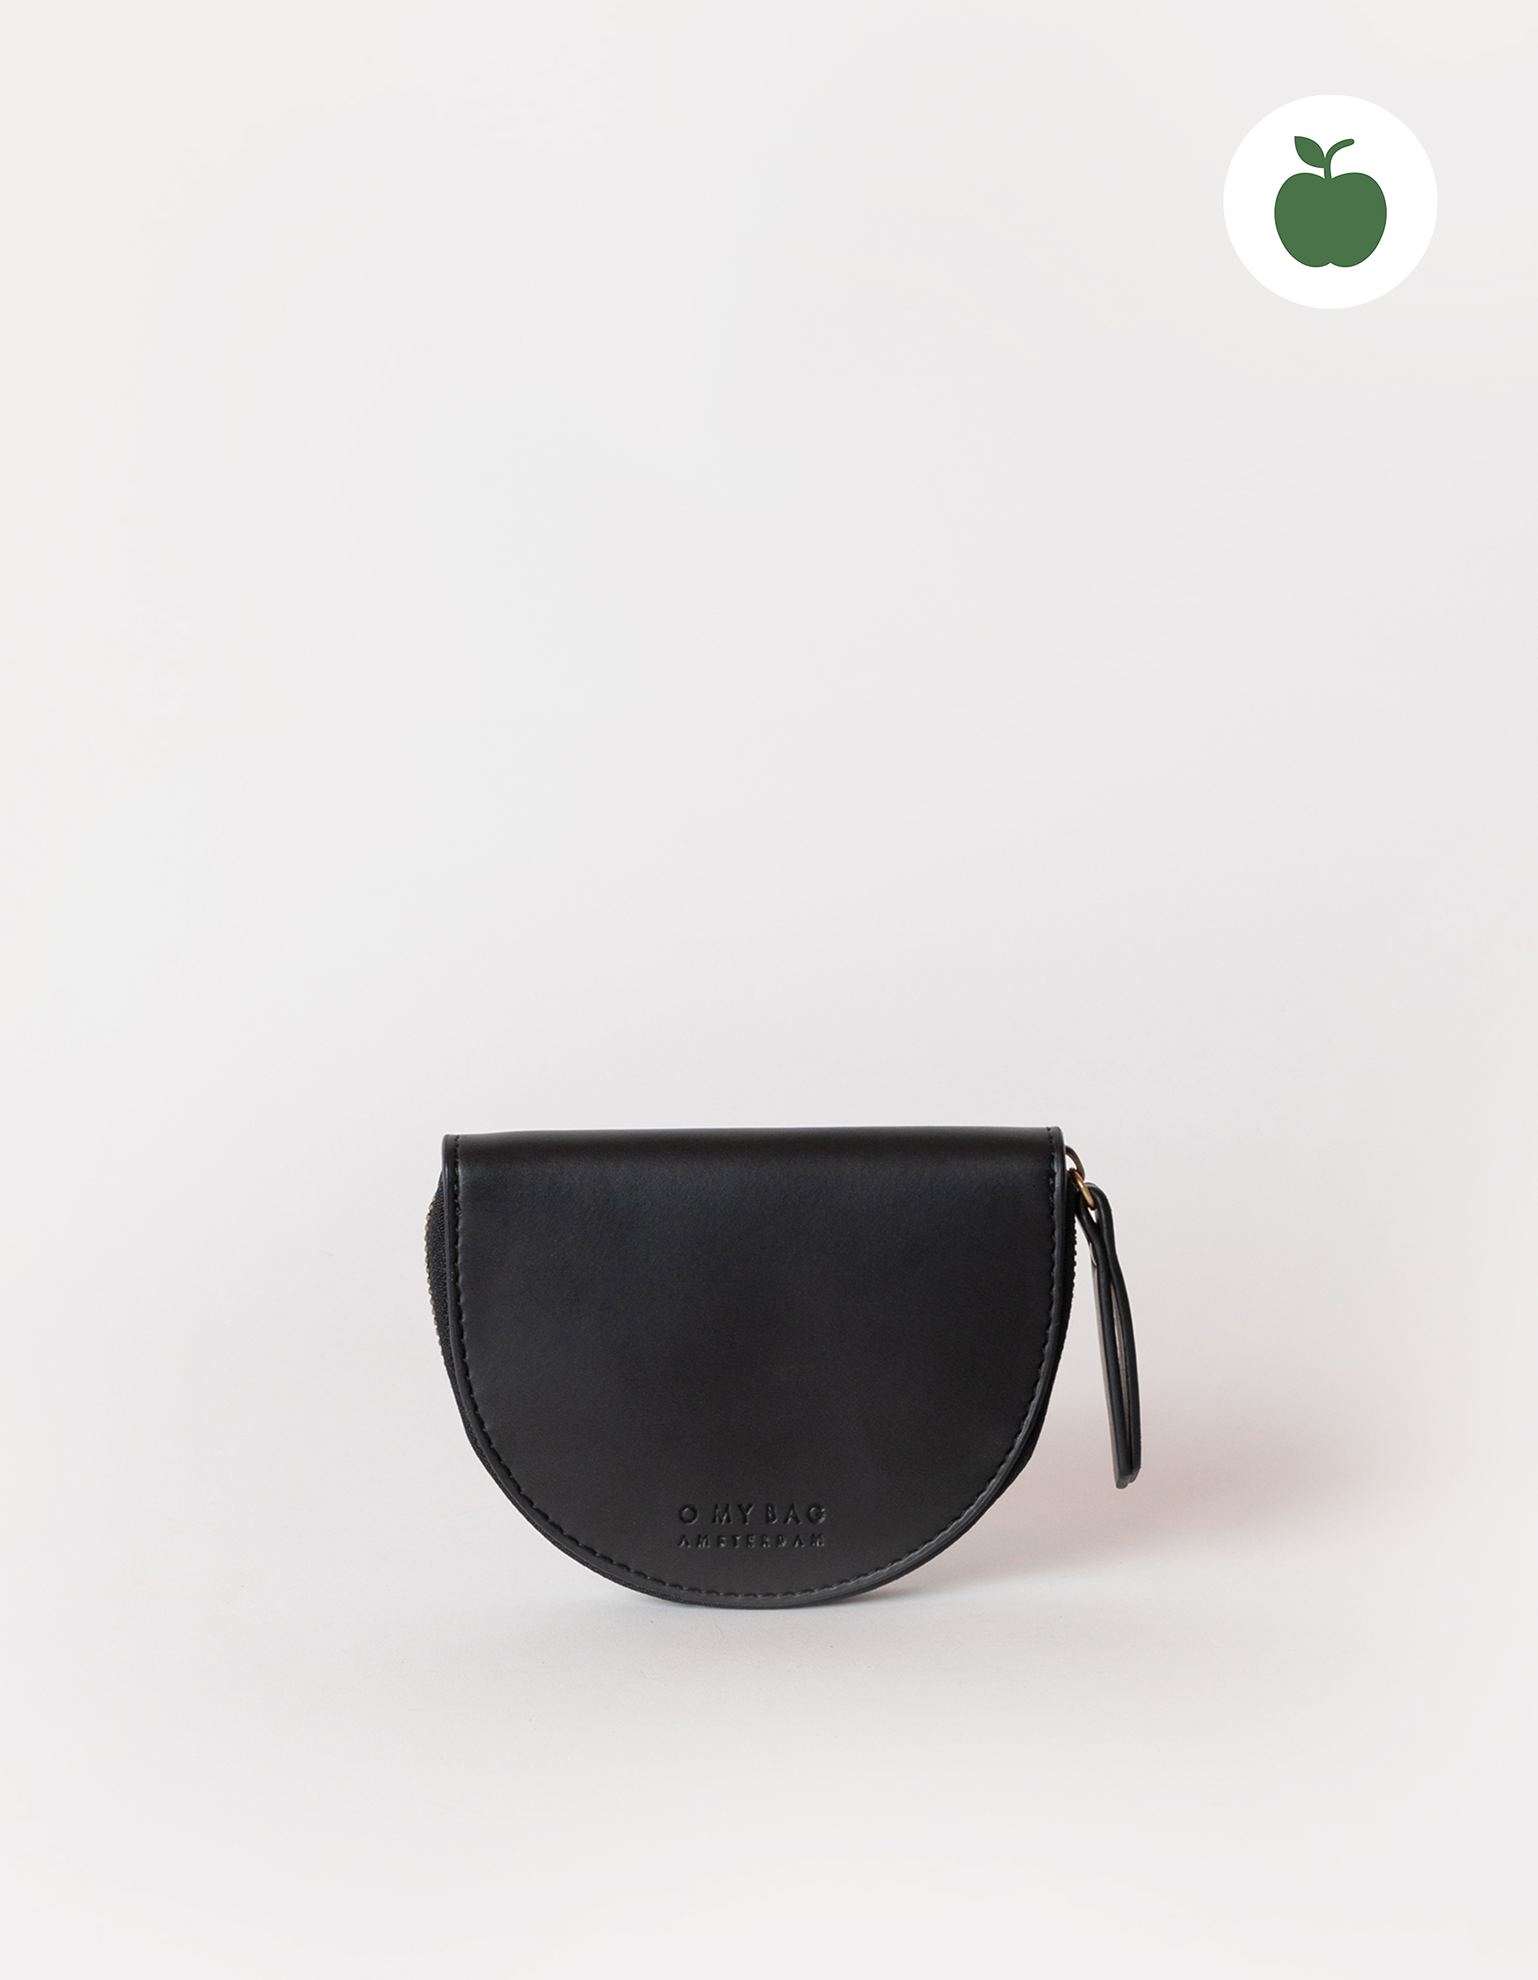 Laura coin purse - black apple leather. Front product image.